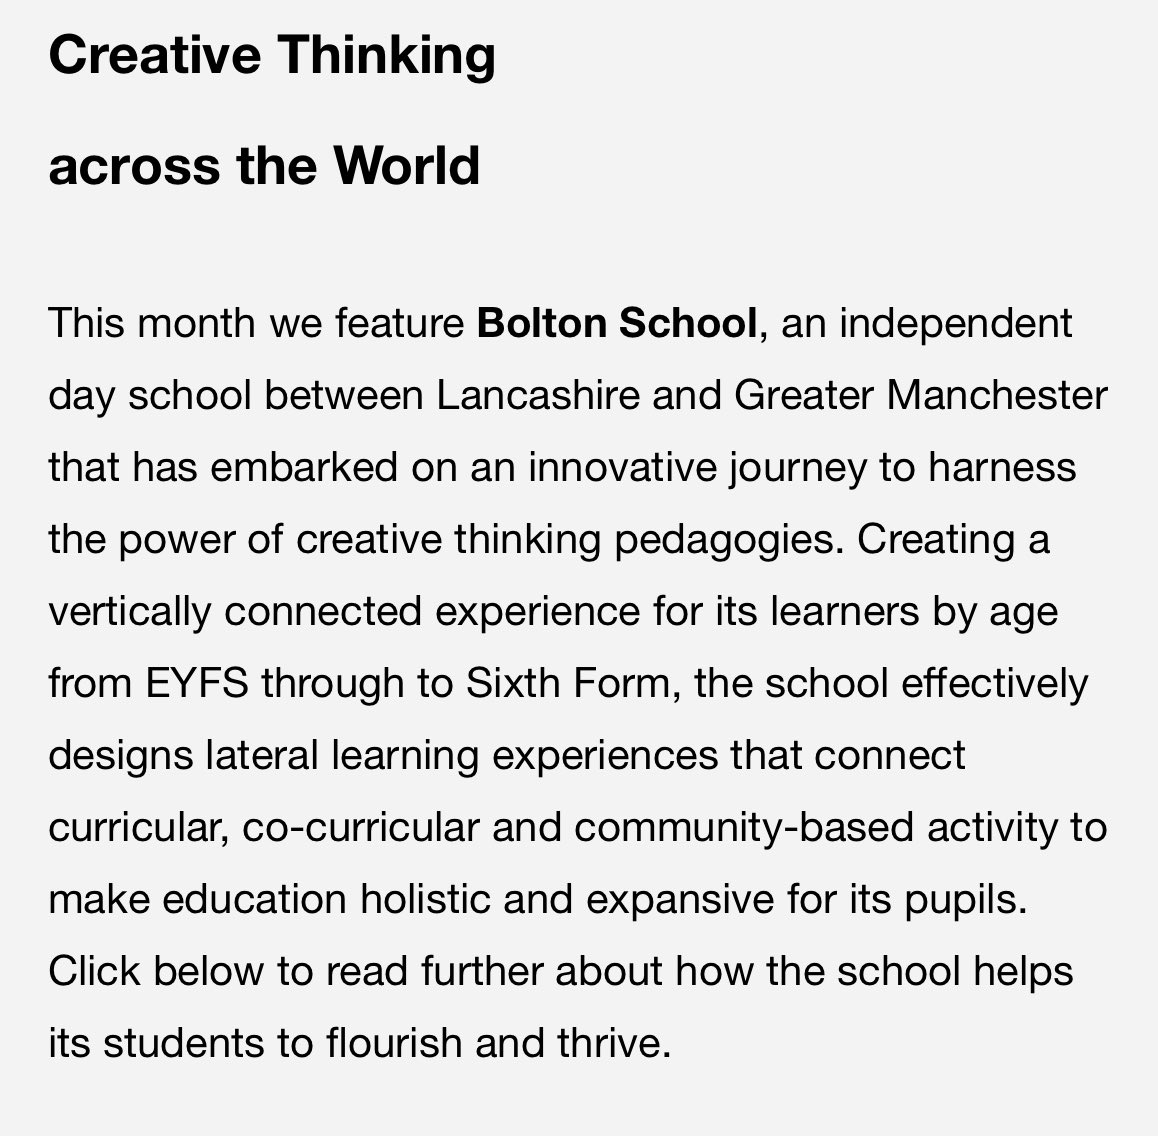 Pleased to see to our developments in creative practices @BoltonSch featured in @GIoCT_official’s summer newsletter. Read my article here: rethinkingassessment.com/rethinking-blo… and the Global Institute of Creative Thinking’s round up here: us18.campaign-archive.com/?e=b886464700&….